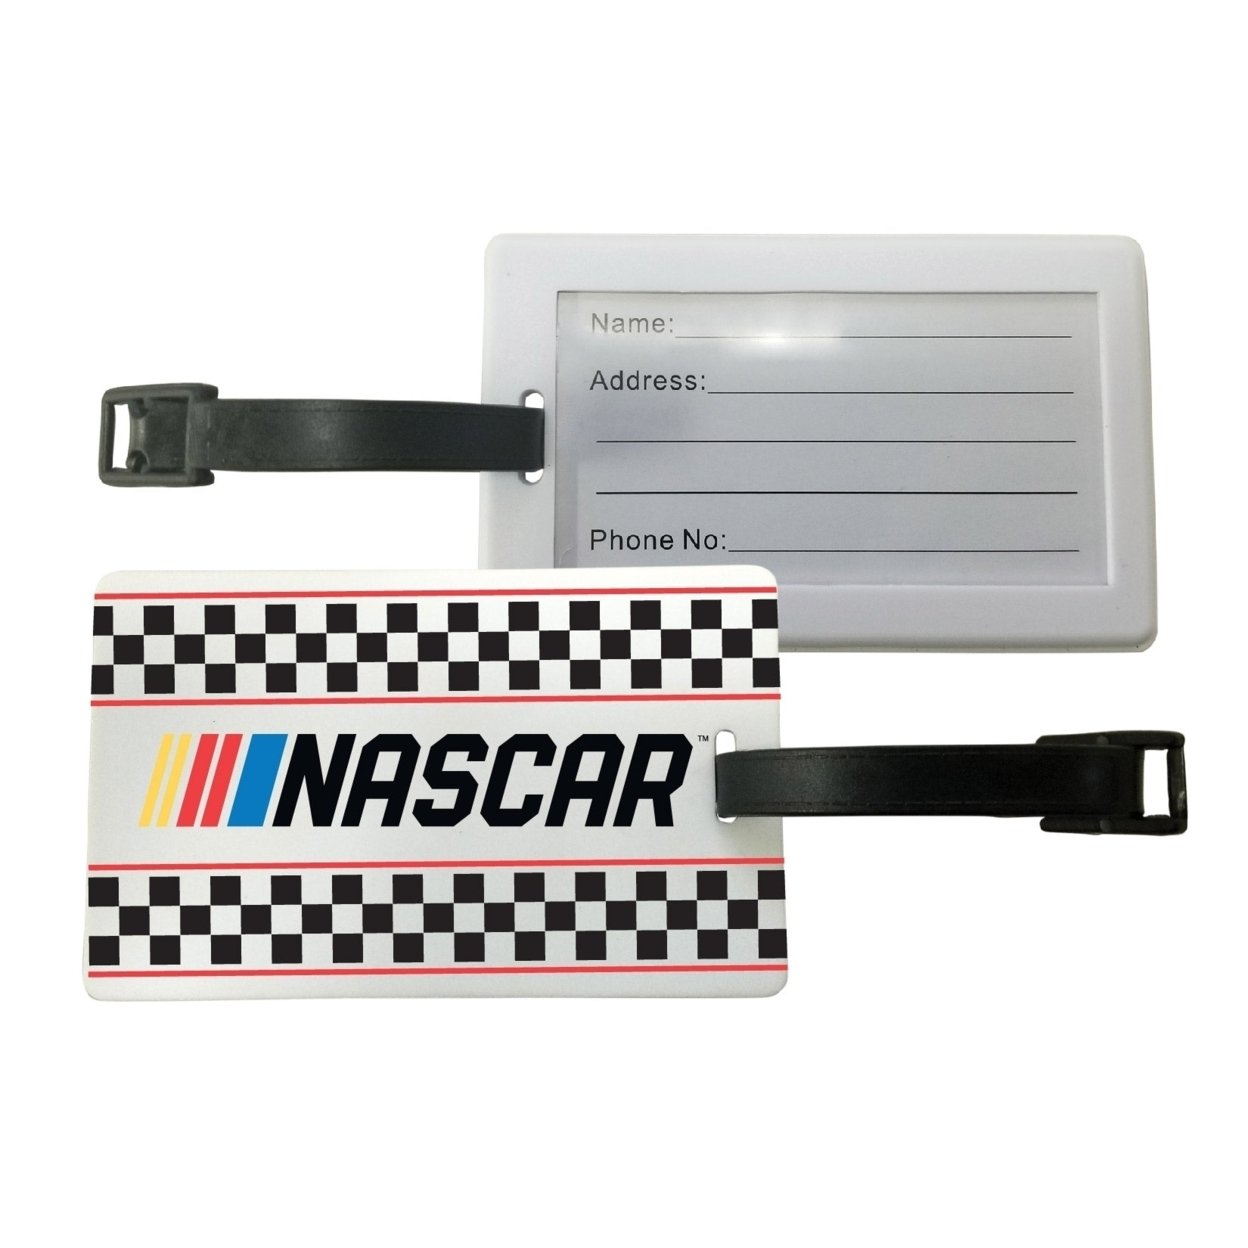 R And R Imports Officially Licensed NASCAR Luggage Tag 2-Pack New For 2020